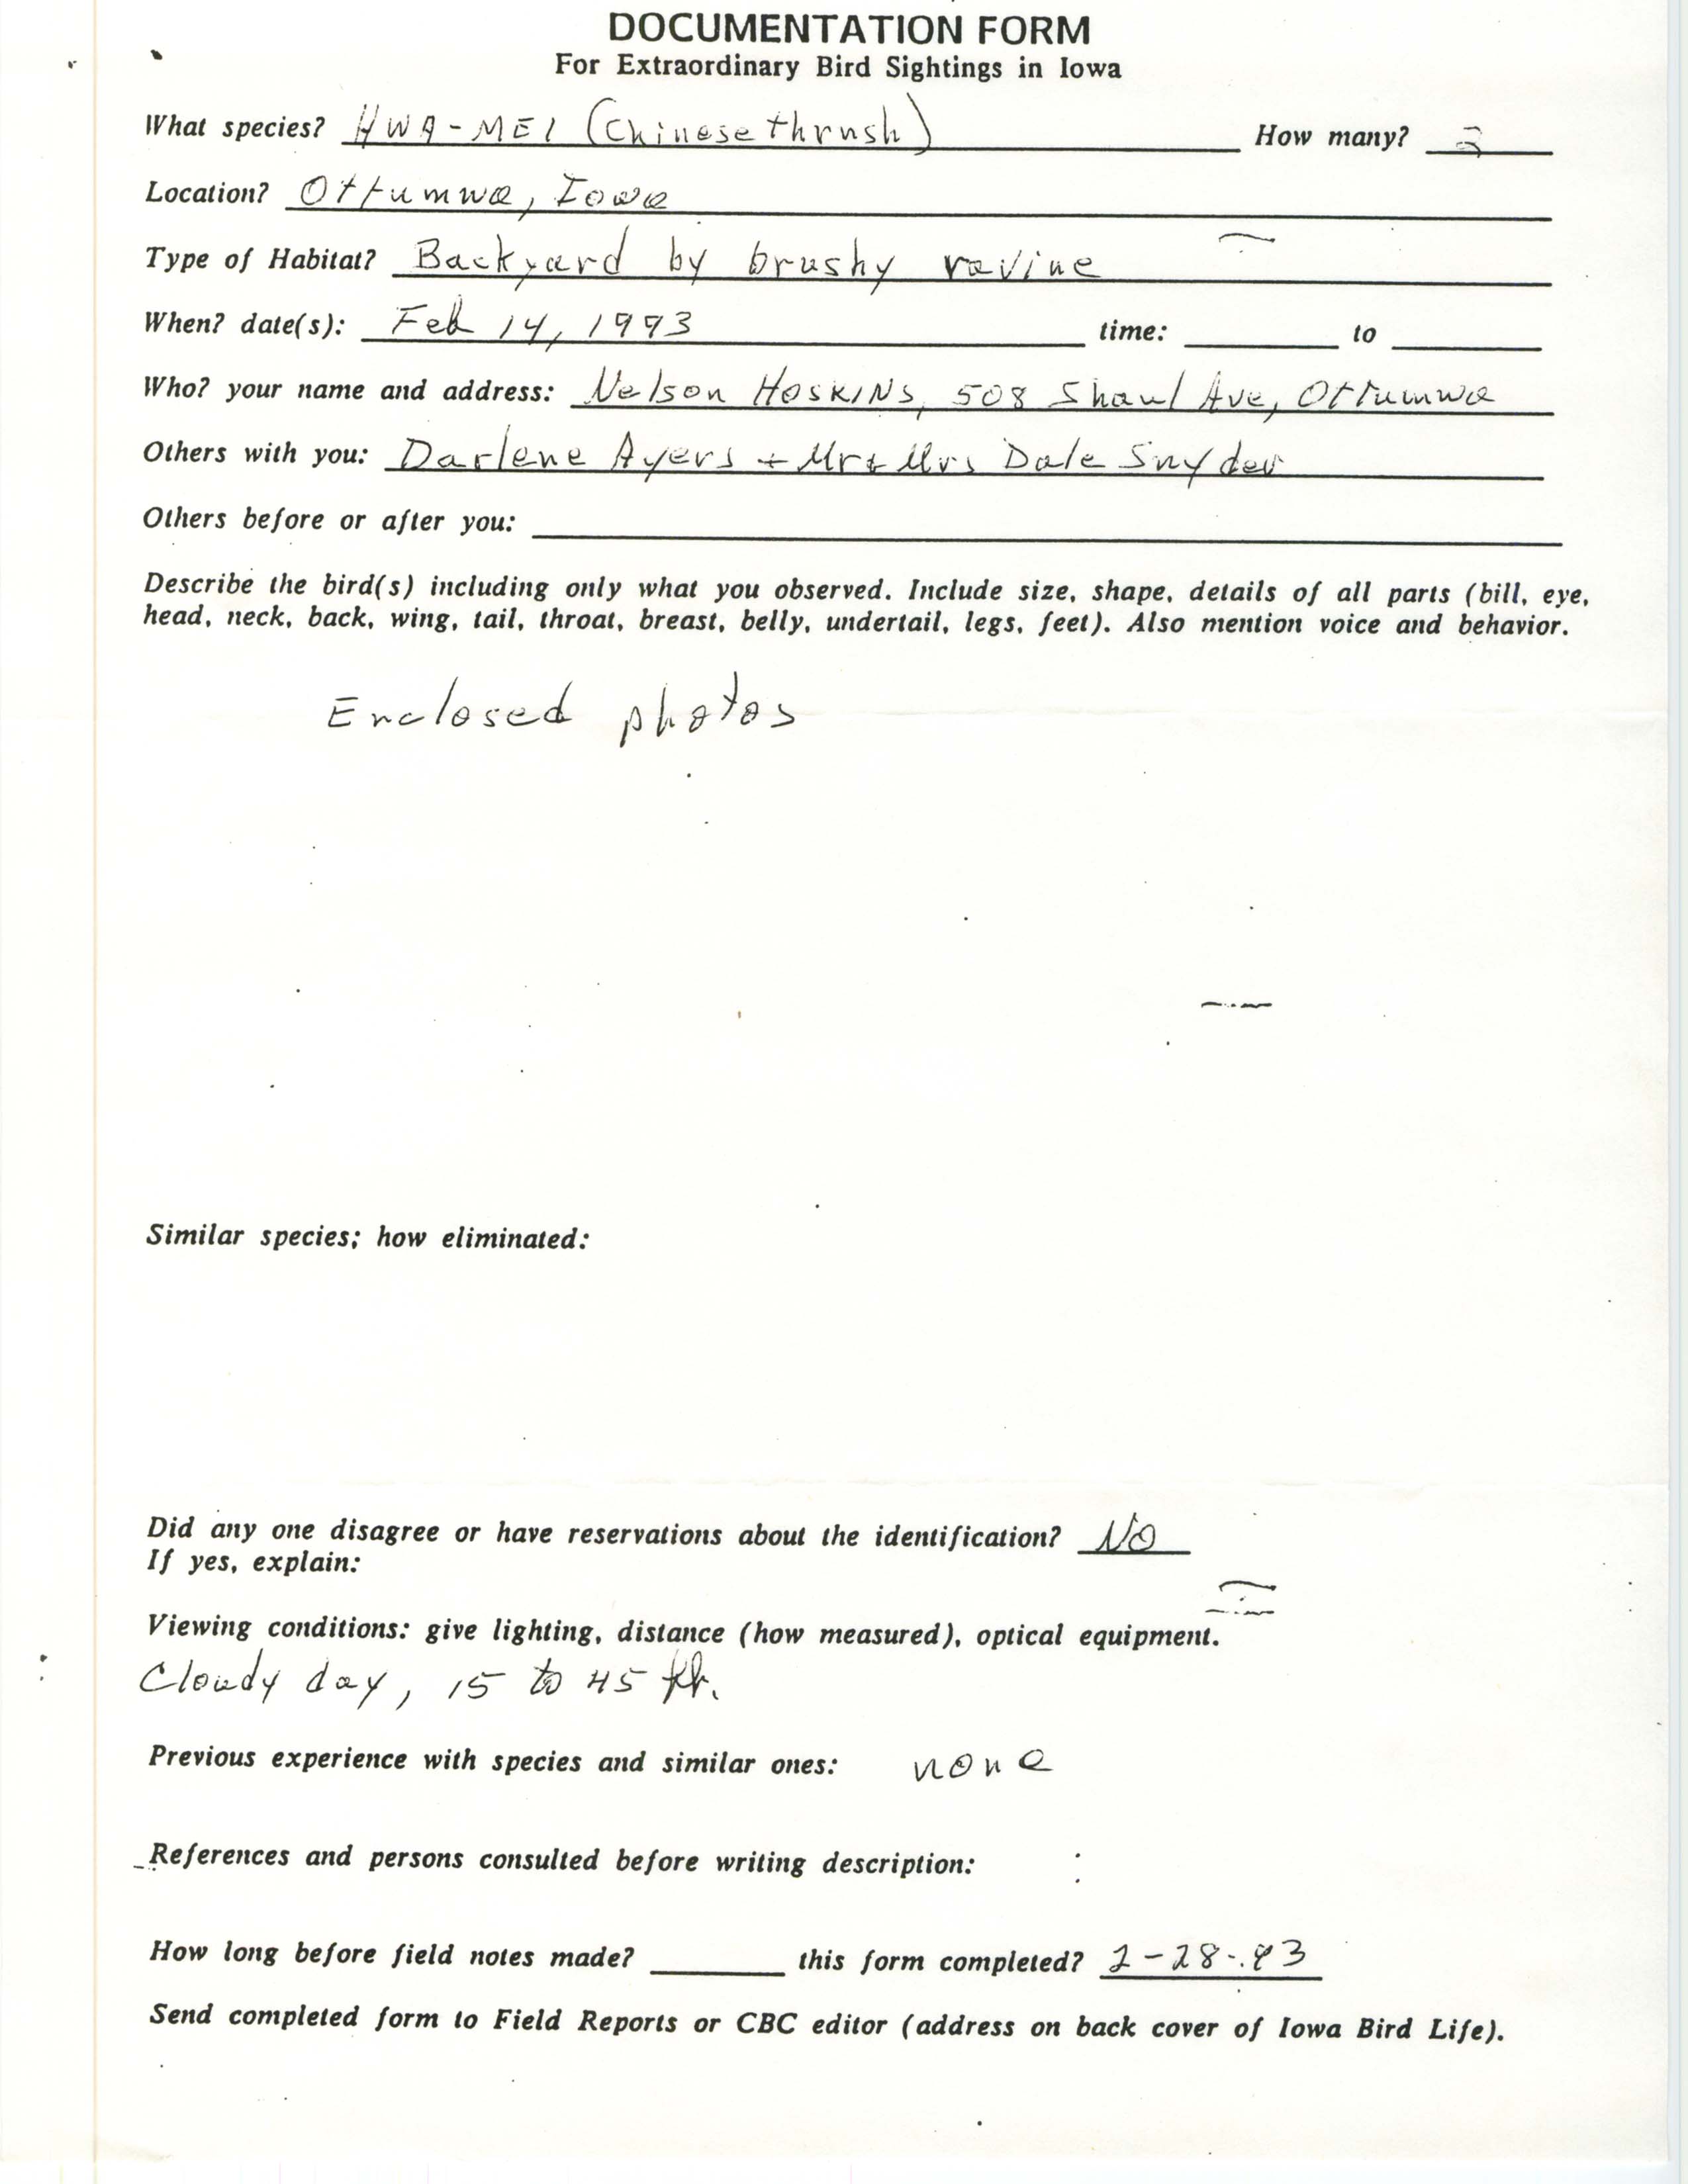 Thomas Kent letter and enclosed documentation form regarding Hwa-Mei sighting, March 4, 1993